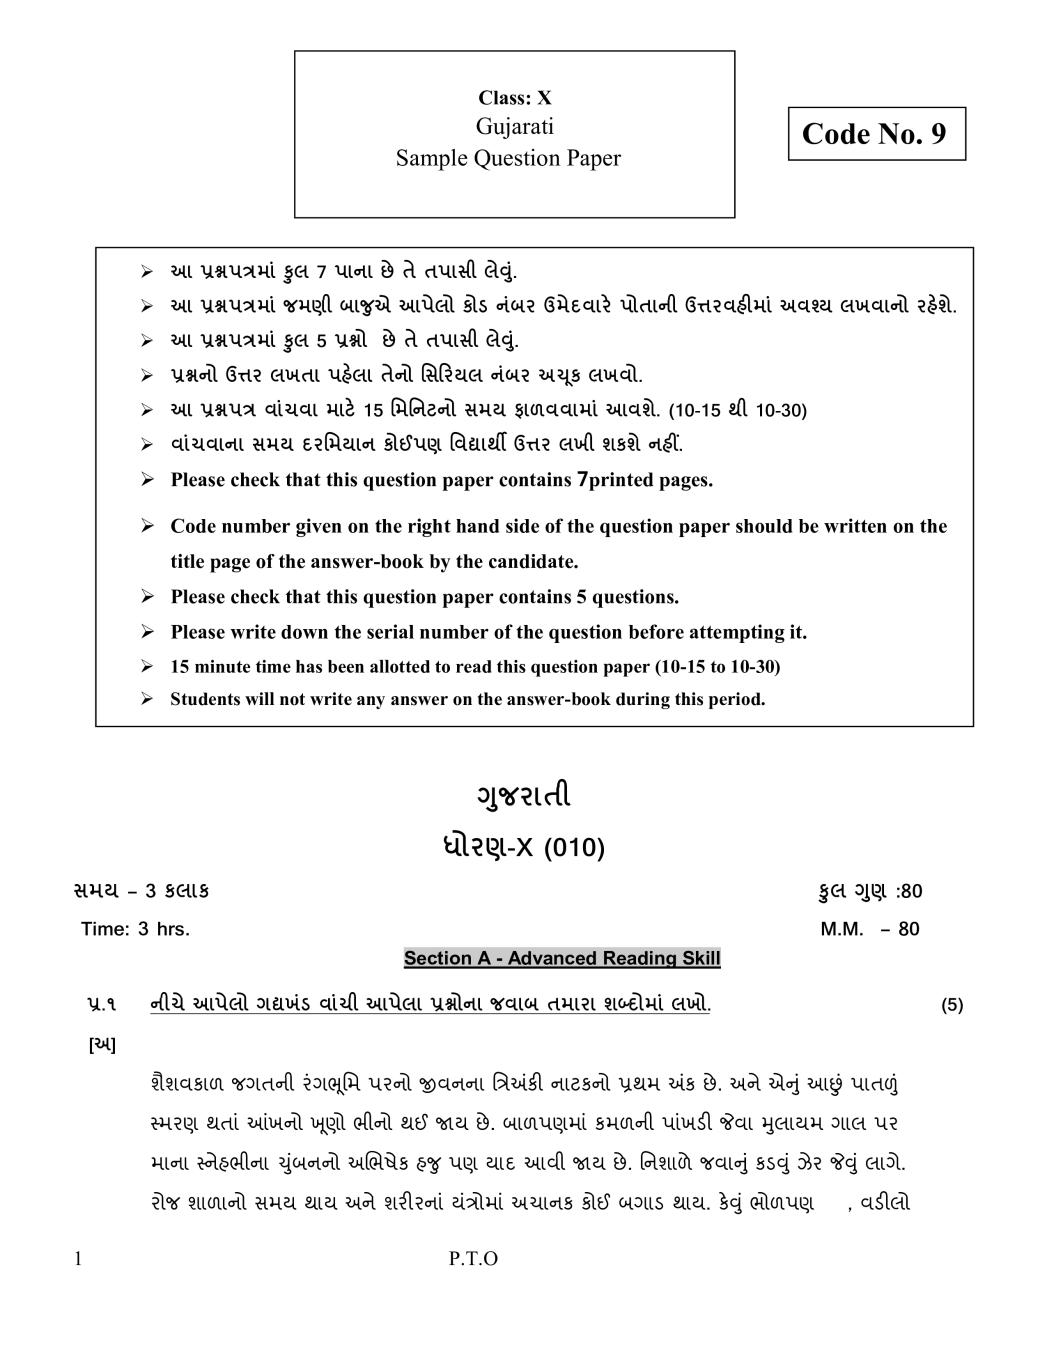 CBSE Class 10 Sample Paper 2020 for Gujarati - Page 1